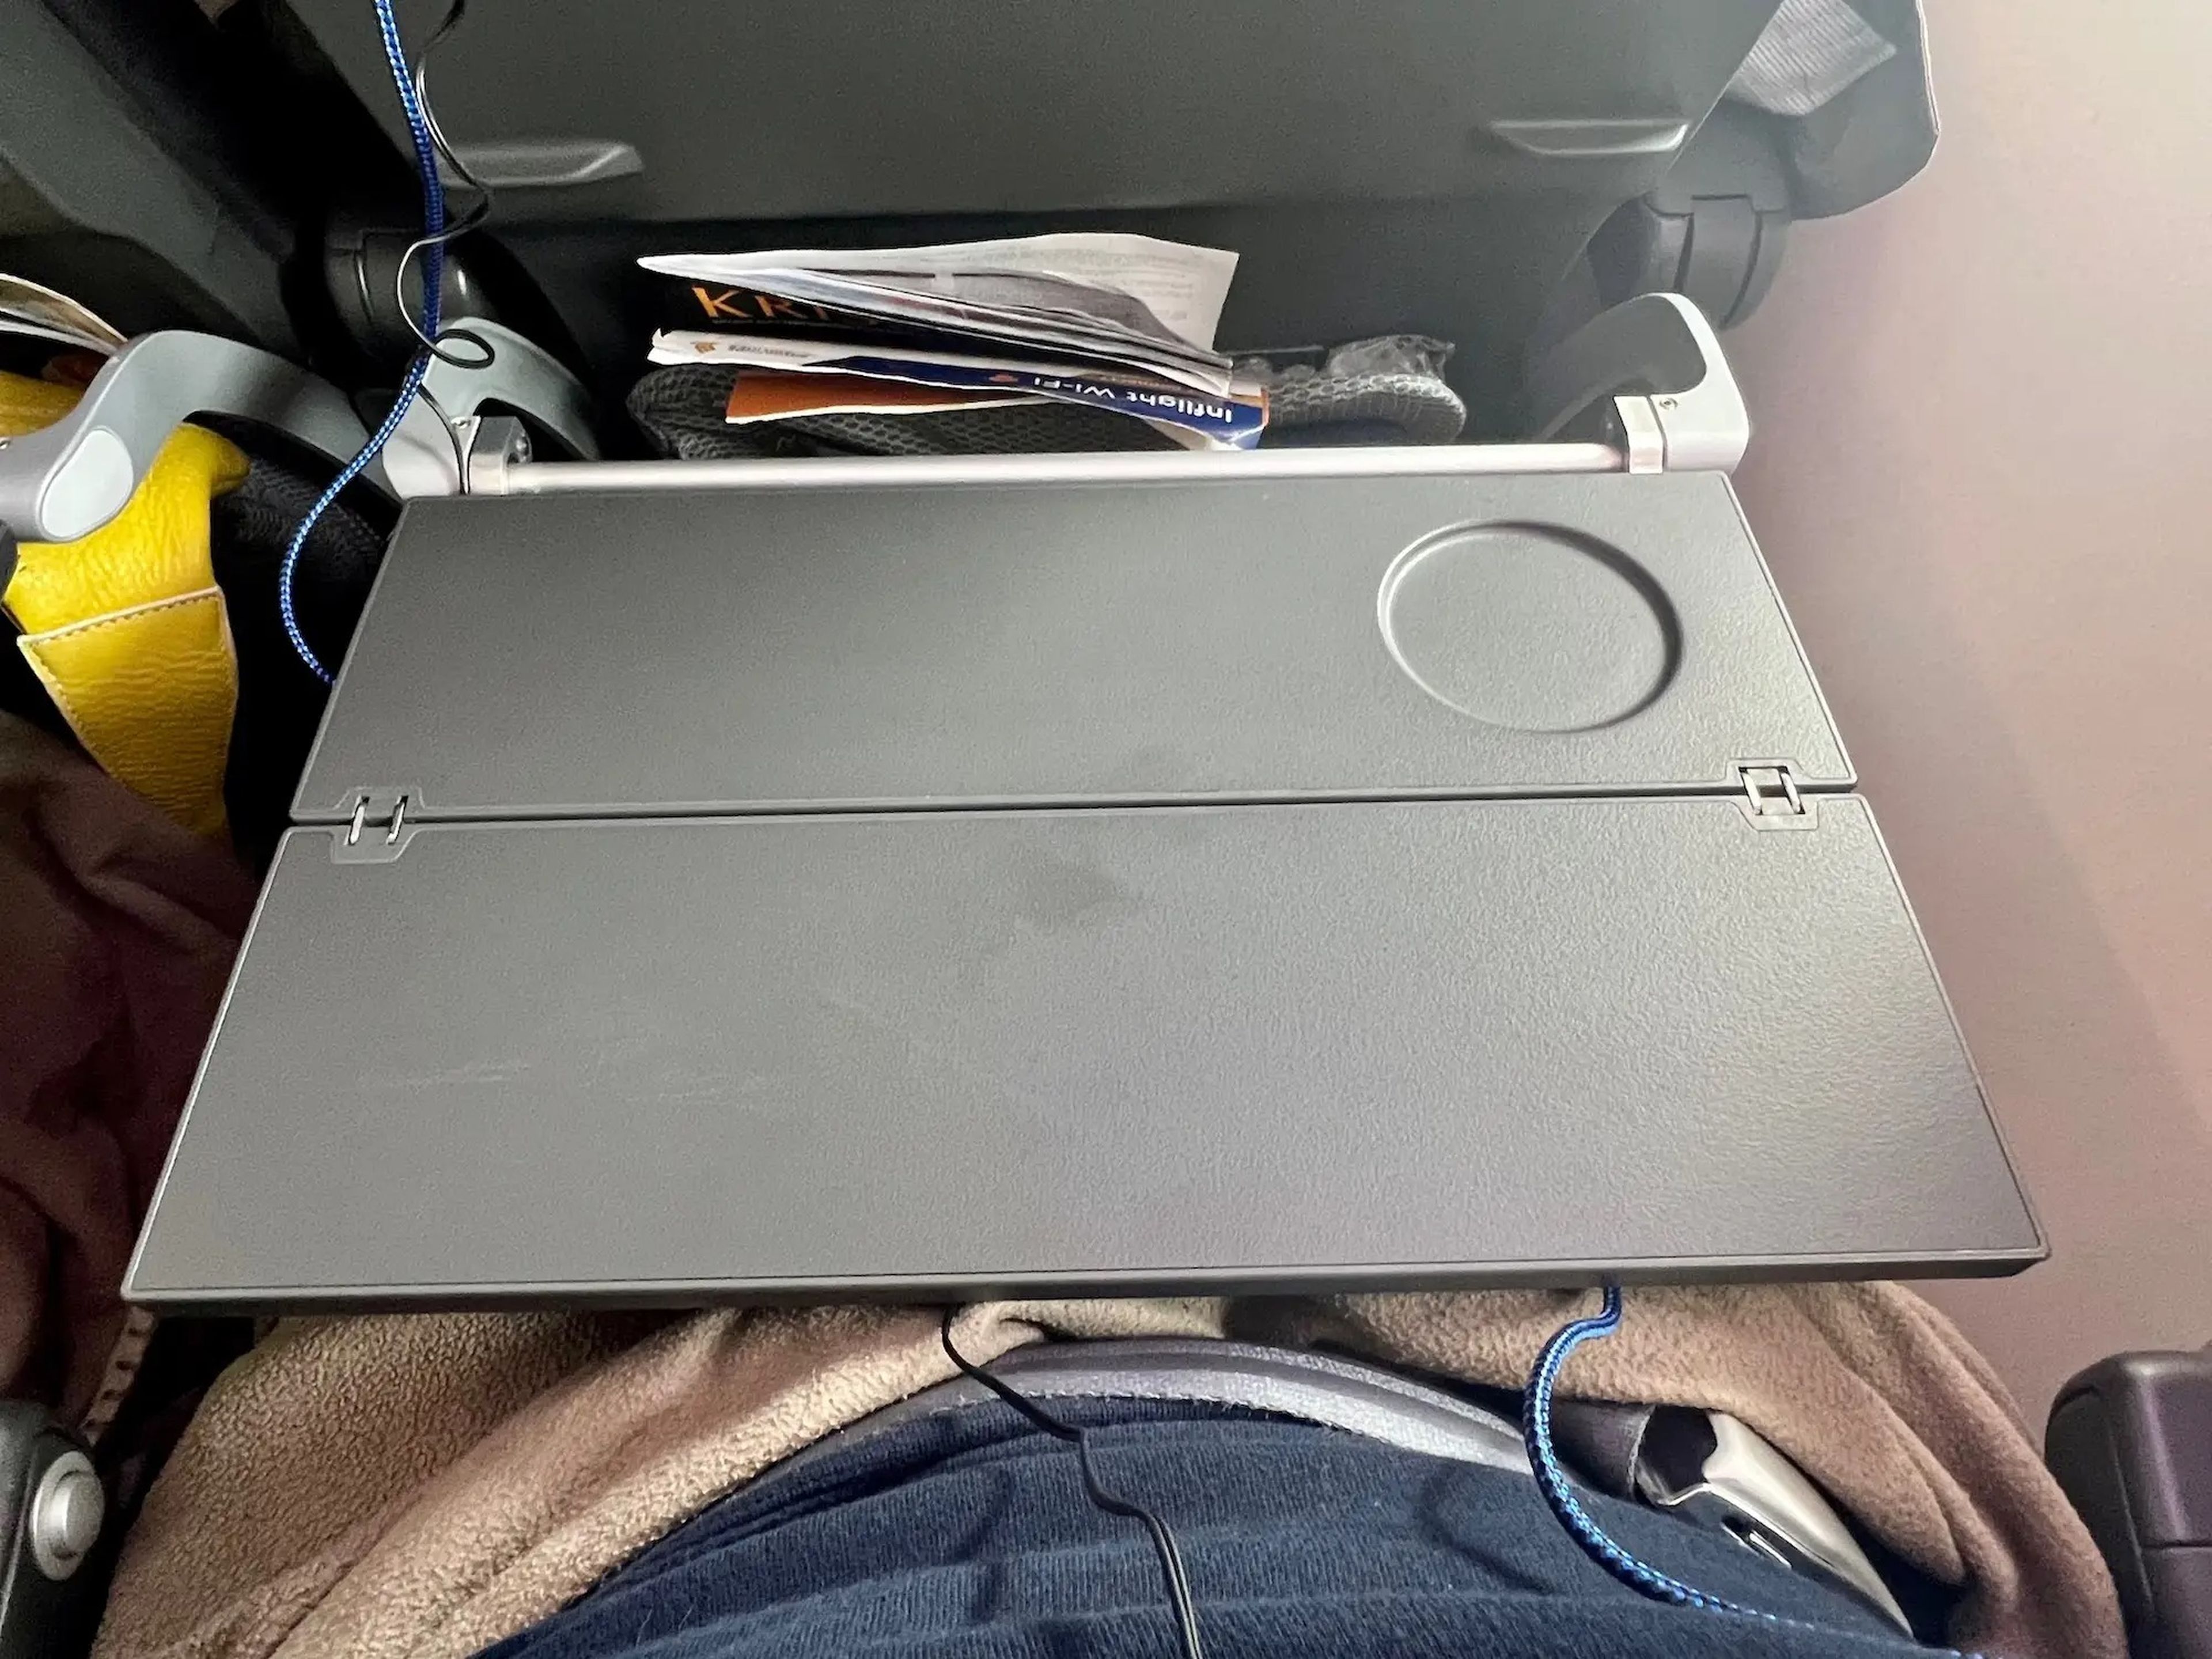 The tray table fully folded out.